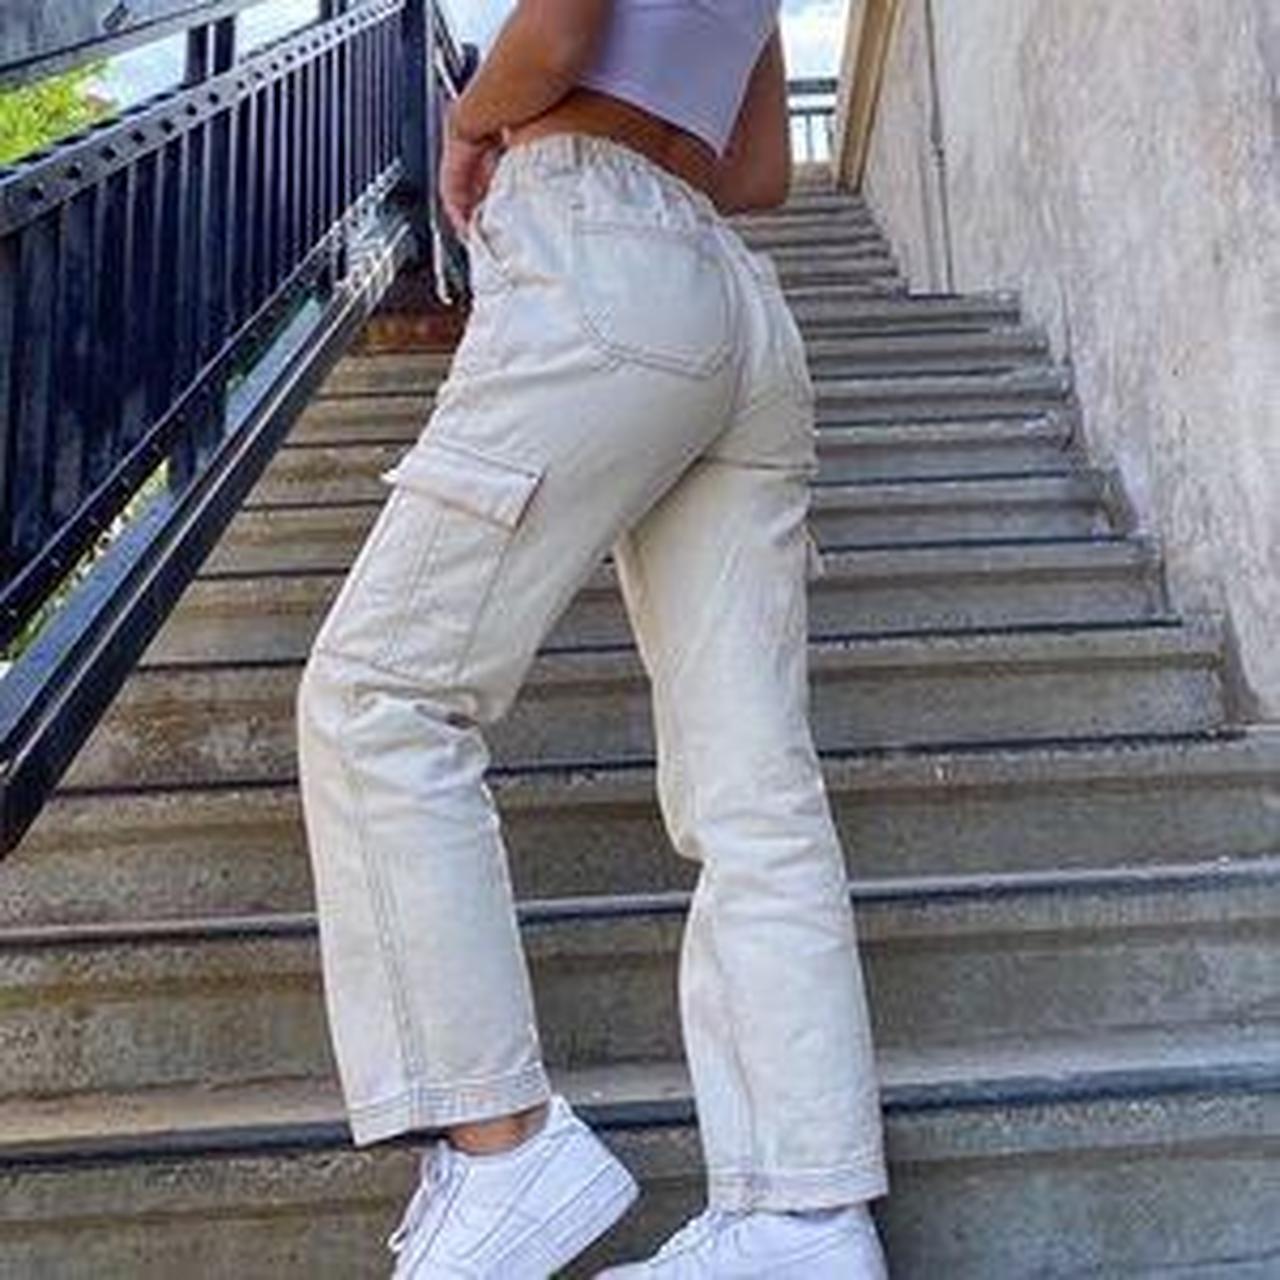 PacSun Women's White and Cream Trousers | Depop